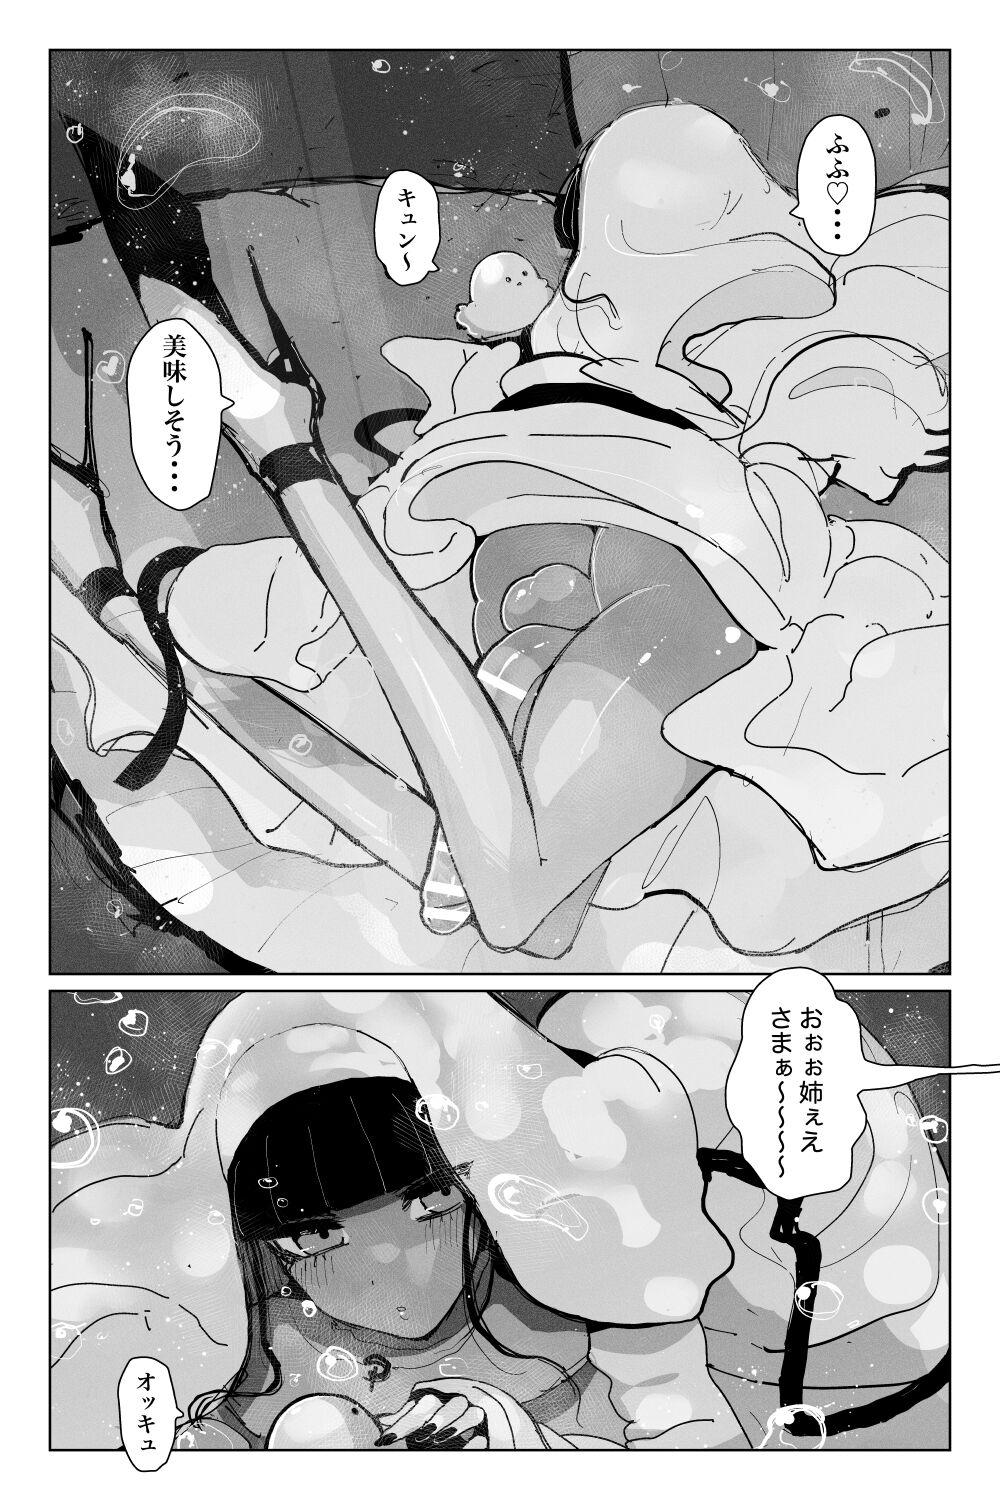 Coroa #03MarineMirage + Bad end... - Original Married - Page 4